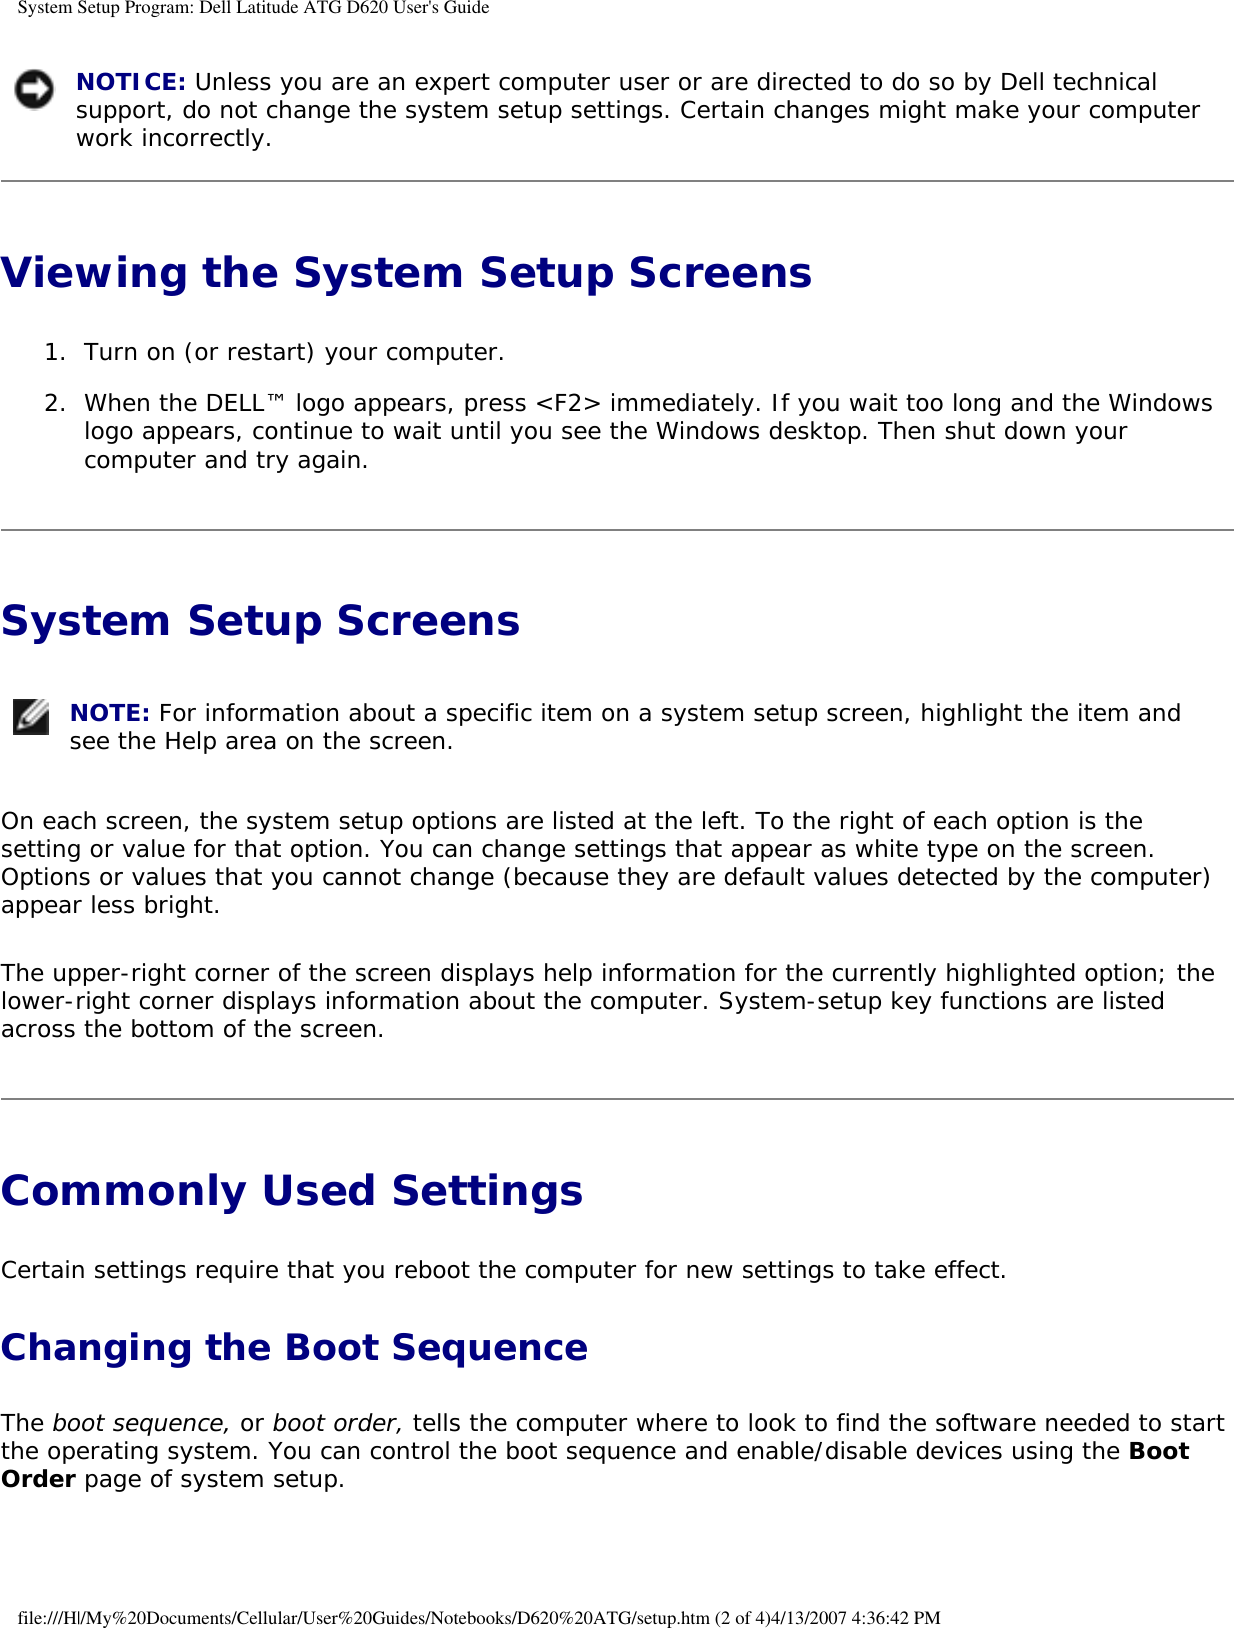 System Setup Program: Dell Latitude ATG D620 User&apos;s Guide NOTICE: Unless you are an expert computer user or are directed to do so by Dell technical support, do not change the system setup settings. Certain changes might make your computer work incorrectly. Viewing the System Setup Screens 1.  Turn on (or restart) your computer.   2.  When the DELL™ logo appears, press &lt;F2&gt; immediately. If you wait too long and the Windows logo appears, continue to wait until you see the Windows desktop. Then shut down your computer and try again.   System Setup Screens  NOTE: For information about a specific item on a system setup screen, highlight the item and see the Help area on the screen. On each screen, the system setup options are listed at the left. To the right of each option is the setting or value for that option. You can change settings that appear as white type on the screen. Options or values that you cannot change (because they are default values detected by the computer) appear less bright.The upper-right corner of the screen displays help information for the currently highlighted option; the lower-right corner displays information about the computer. System-setup key functions are listed across the bottom of the screen.Commonly Used Settings Certain settings require that you reboot the computer for new settings to take effect.Changing the Boot SequenceThe boot sequence, or boot order, tells the computer where to look to find the software needed to start the operating system. You can control the boot sequence and enable/disable devices using the Boot Order page of system setup.file:///H|/My%20Documents/Cellular/User%20Guides/Notebooks/D620%20ATG/setup.htm (2 of 4)4/13/2007 4:36:42 PM